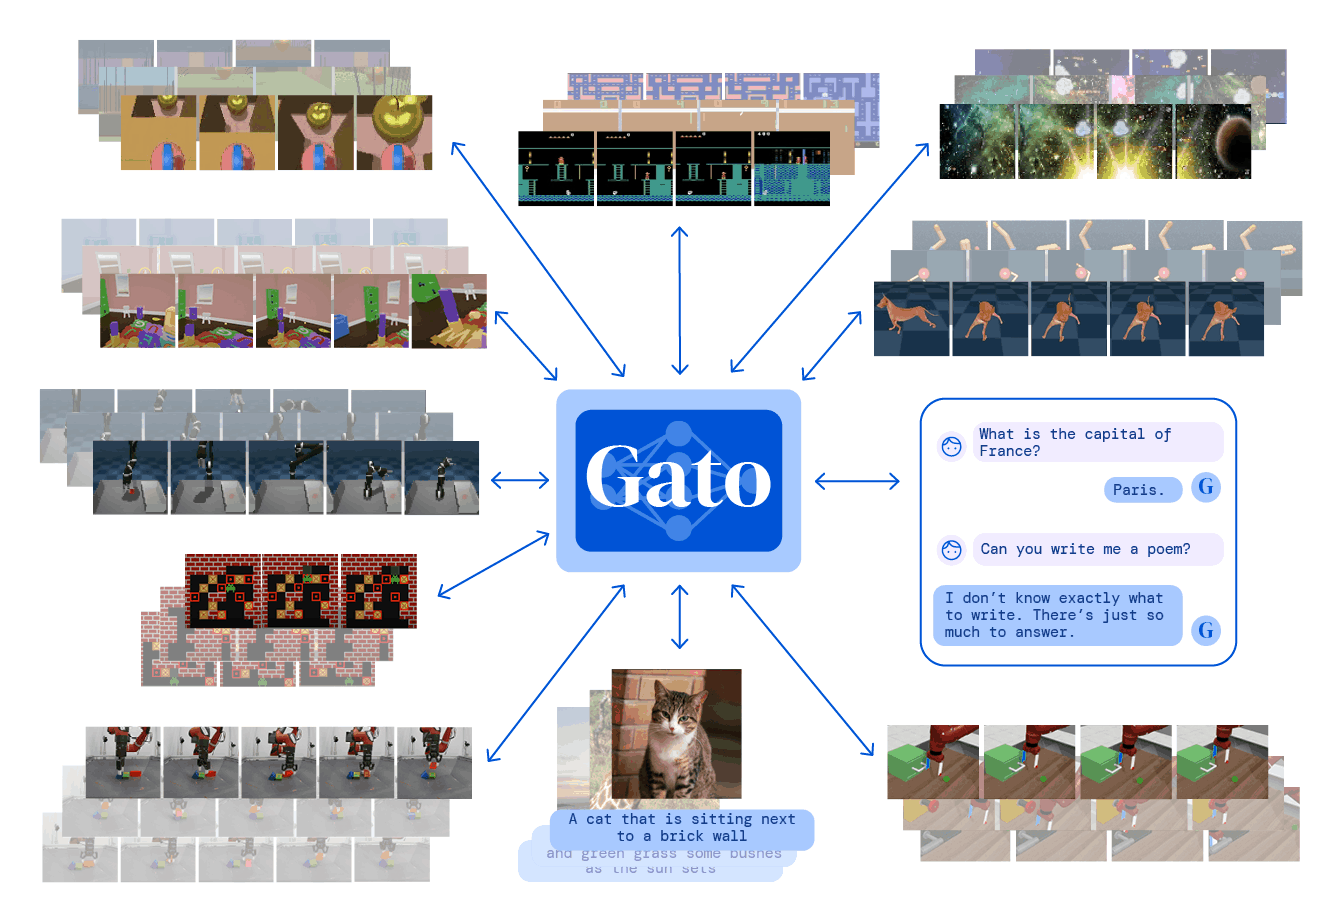 Figure 1: A generalist agent. Gato can sense and act with different embodiments across a wide range of environments using a single neural network with the same set of weights. Gato was trained on 604 distinct tasks with varying modalities, observations and action specifications.